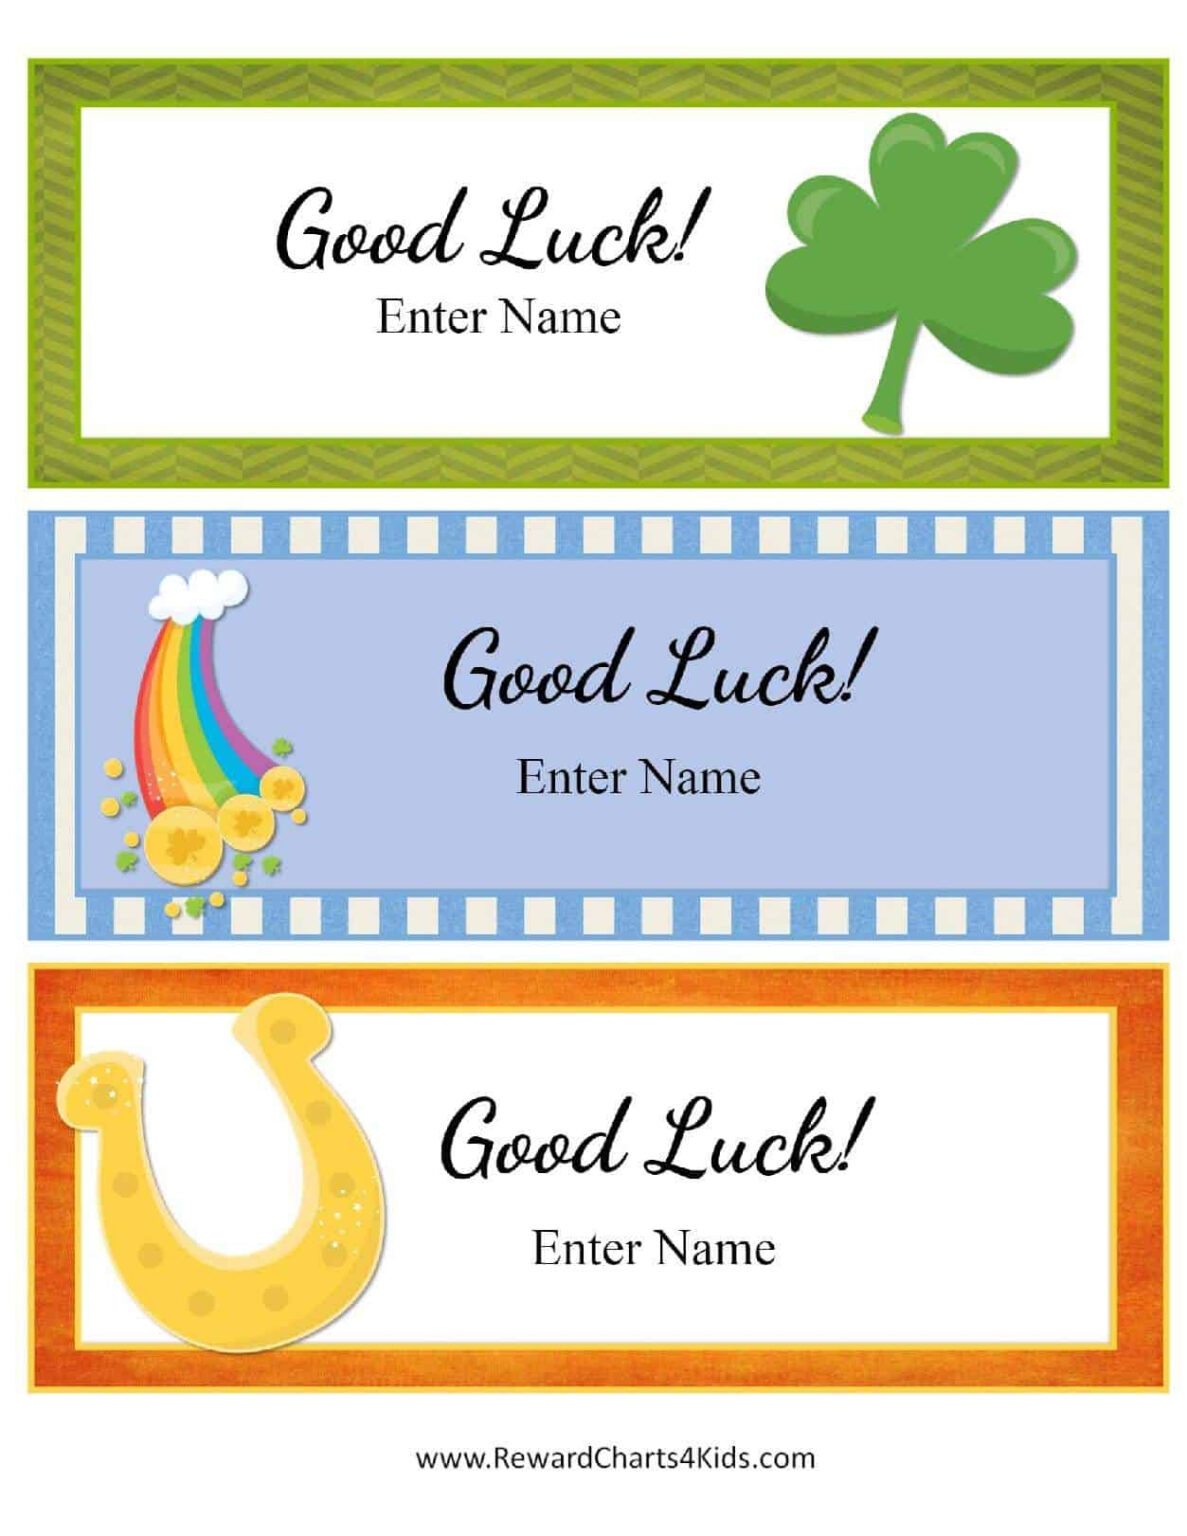 free-good-luck-cards-for-kids-customize-online-print-at-home